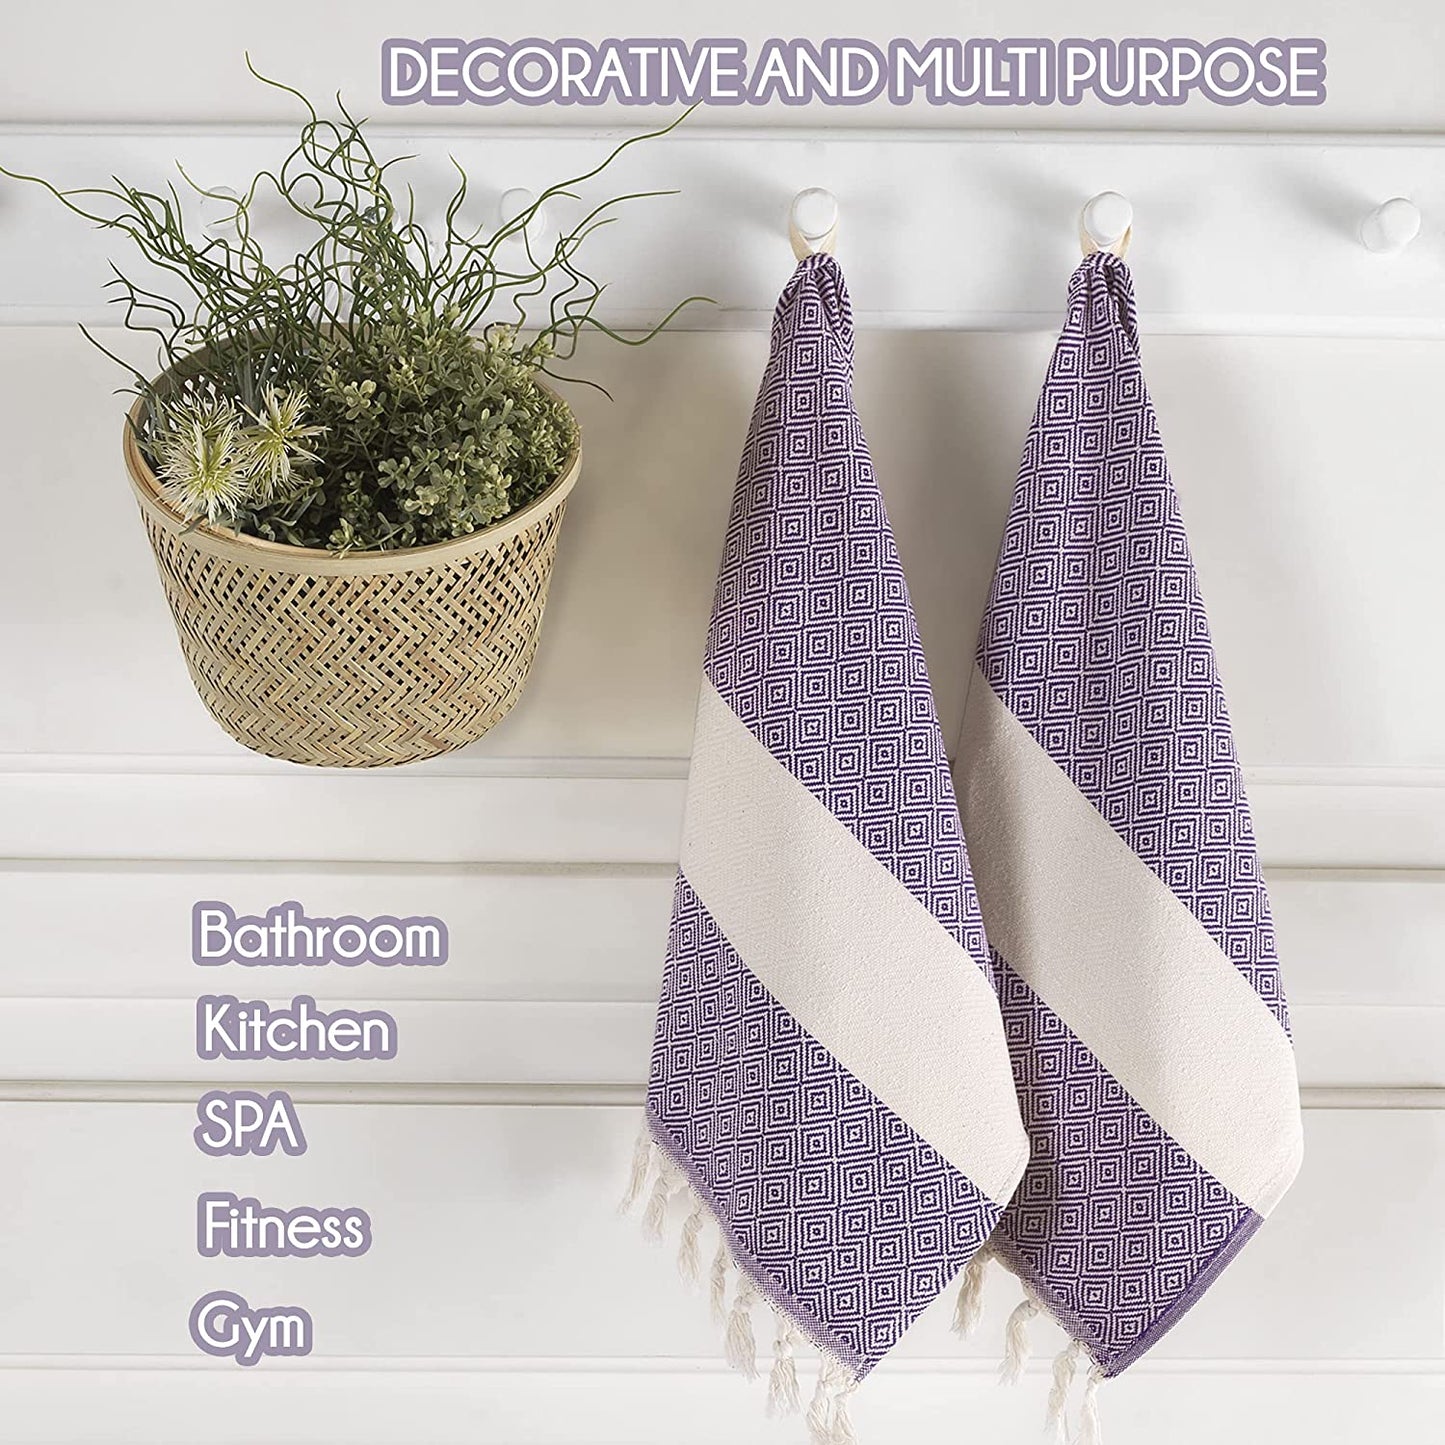 New 2 Home Kitchen Hand Towels Set of 2 | 100% Cotton Decorative Turkish Hand Towels for Bathroom, Gym, Yoga, SPA | Quick Dry Farmhouse Towels for Hands, Hair and Face (19x39 inches, Purple)